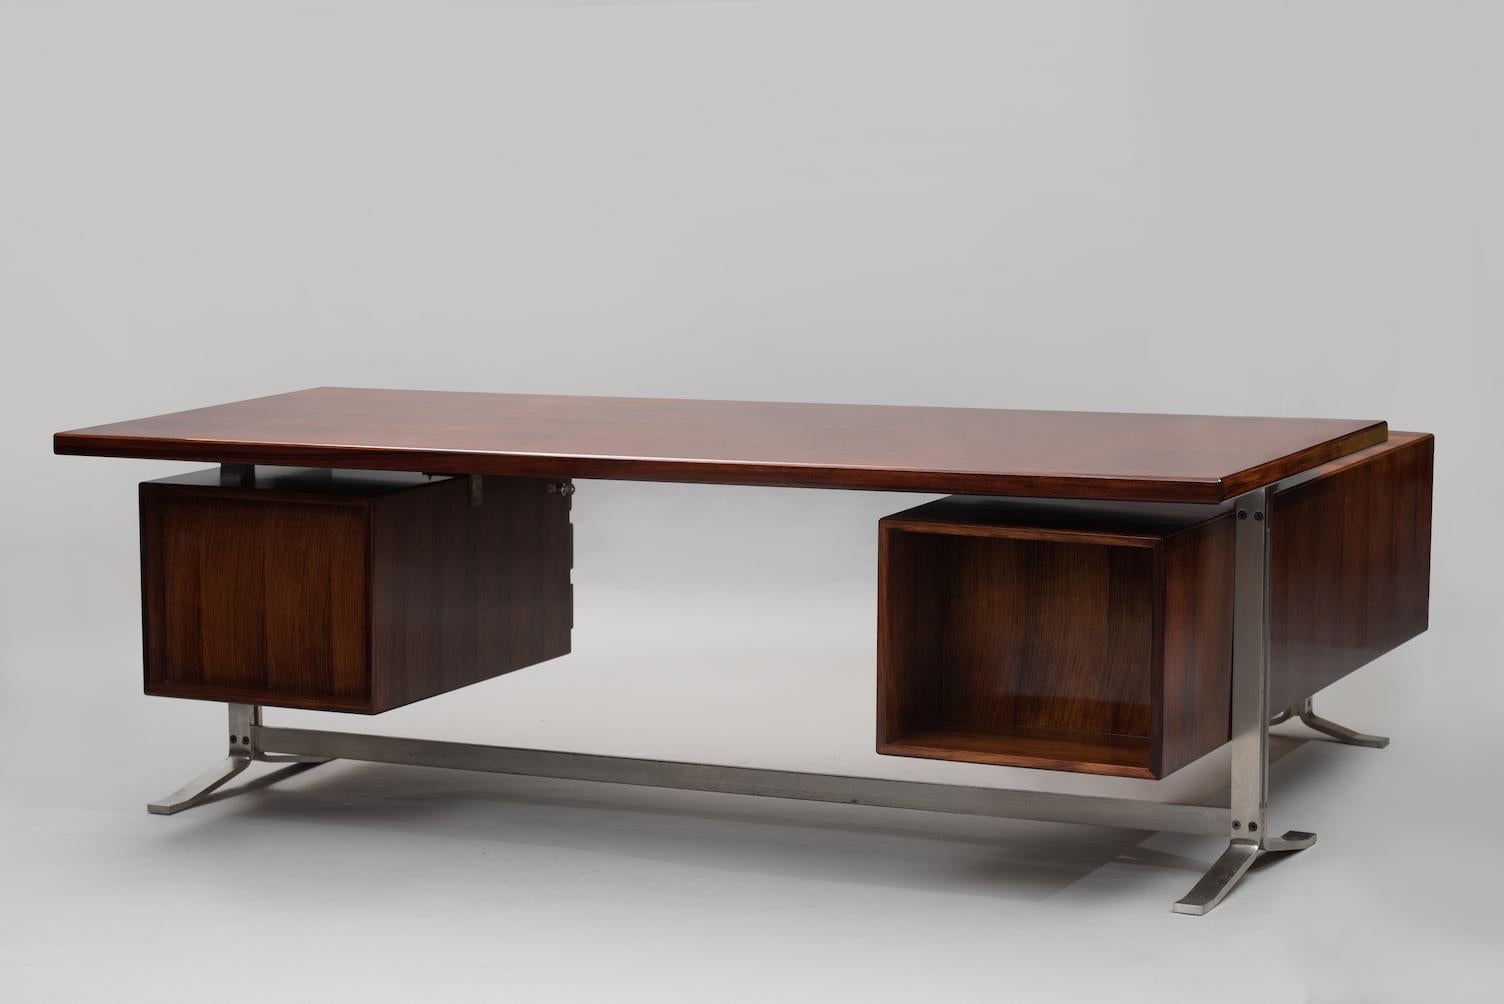 Gianni Moscatelli executive rosewood angle desk for Formanova, legs in brushed chromed metal.
Measures: Top H 73 cm x W 225 cm x D 90 cm
From the desk top to the end of the floating sideboard W. 168 cm.